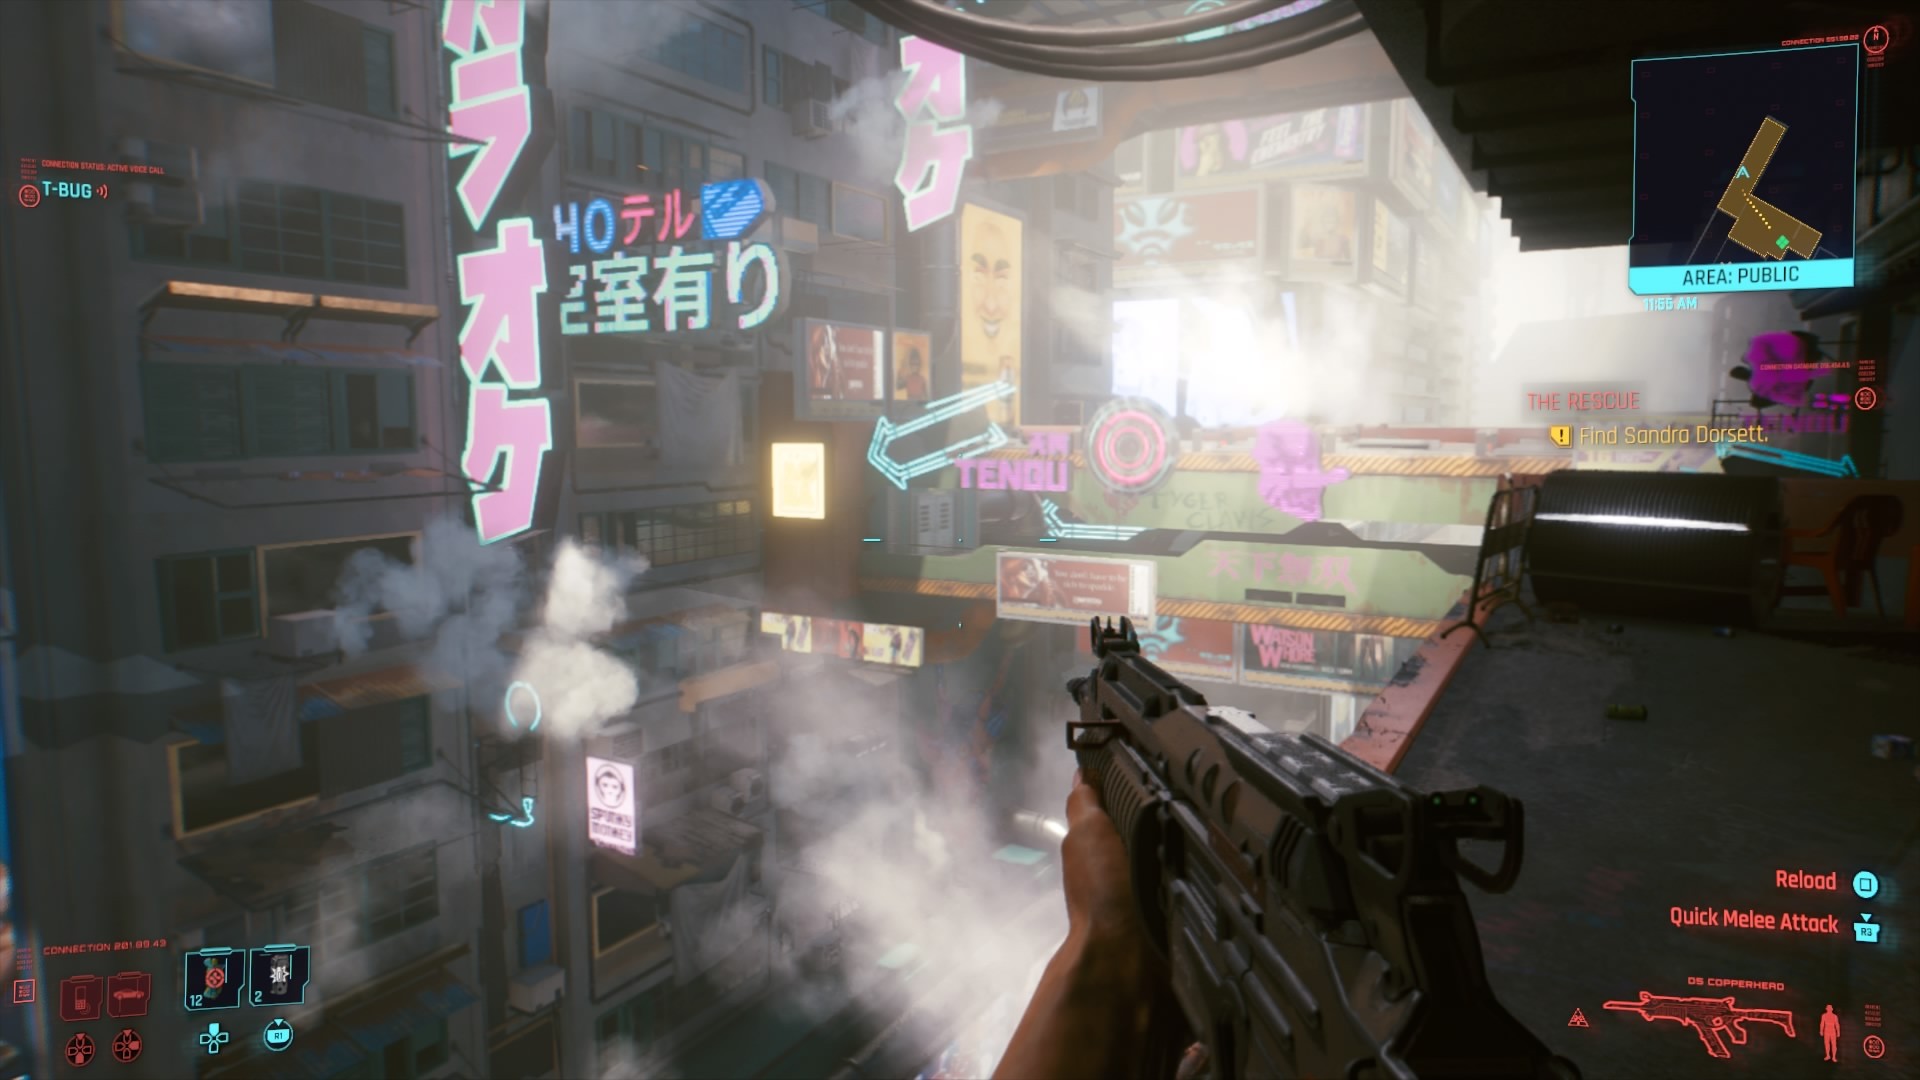 Cyberpunk 2077 Is Looking Rough On PS4 And Xbox One At The Moment